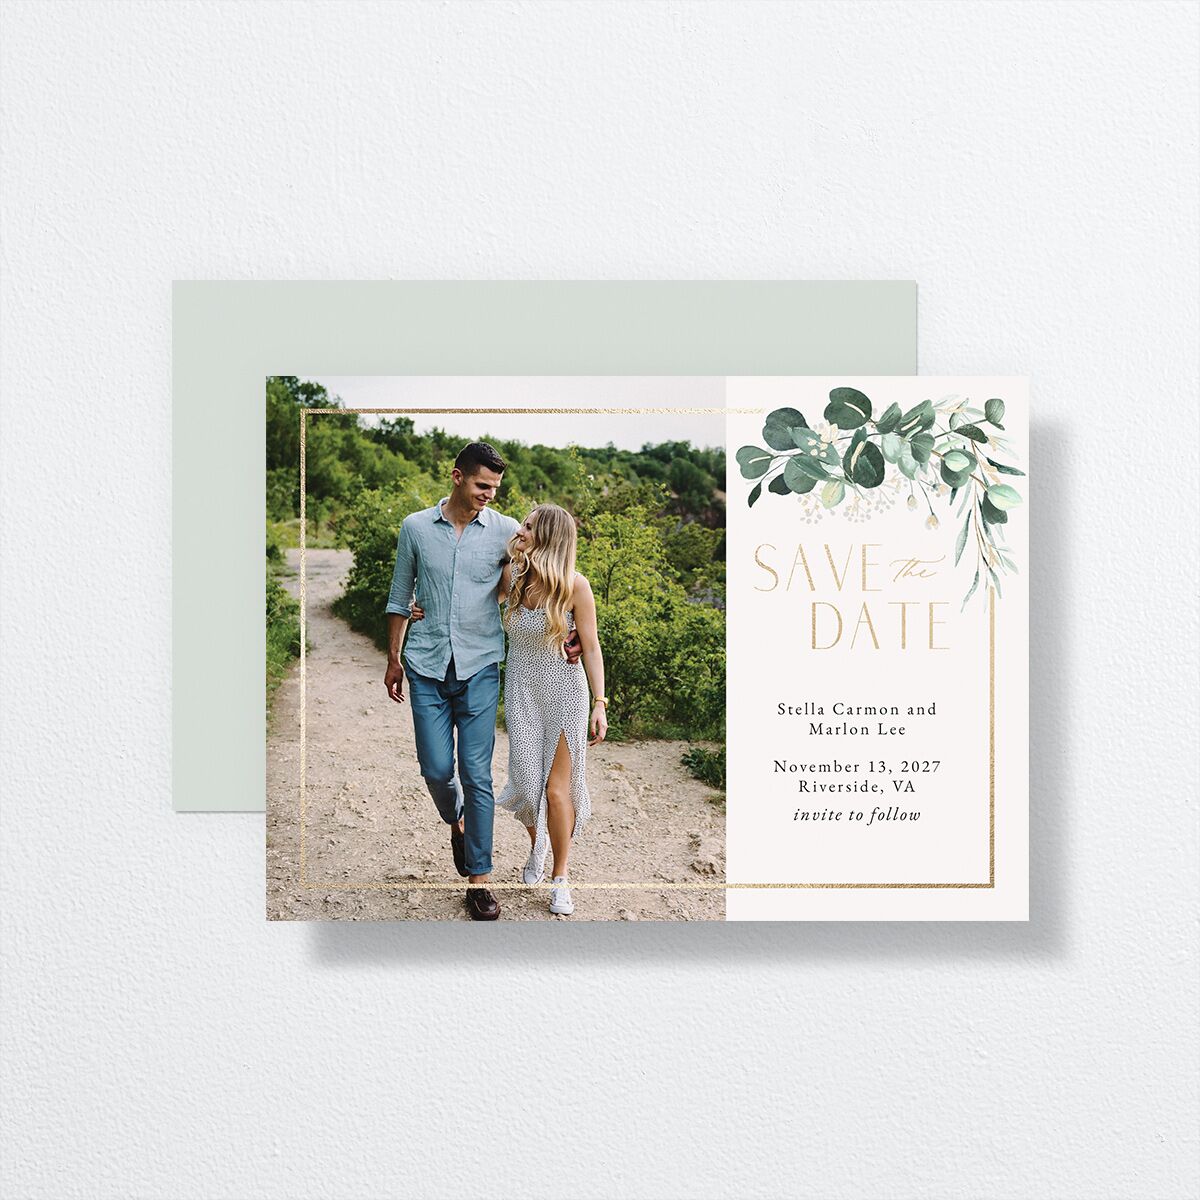 Timeless Hoop Save The Date Cards front-and-back in white